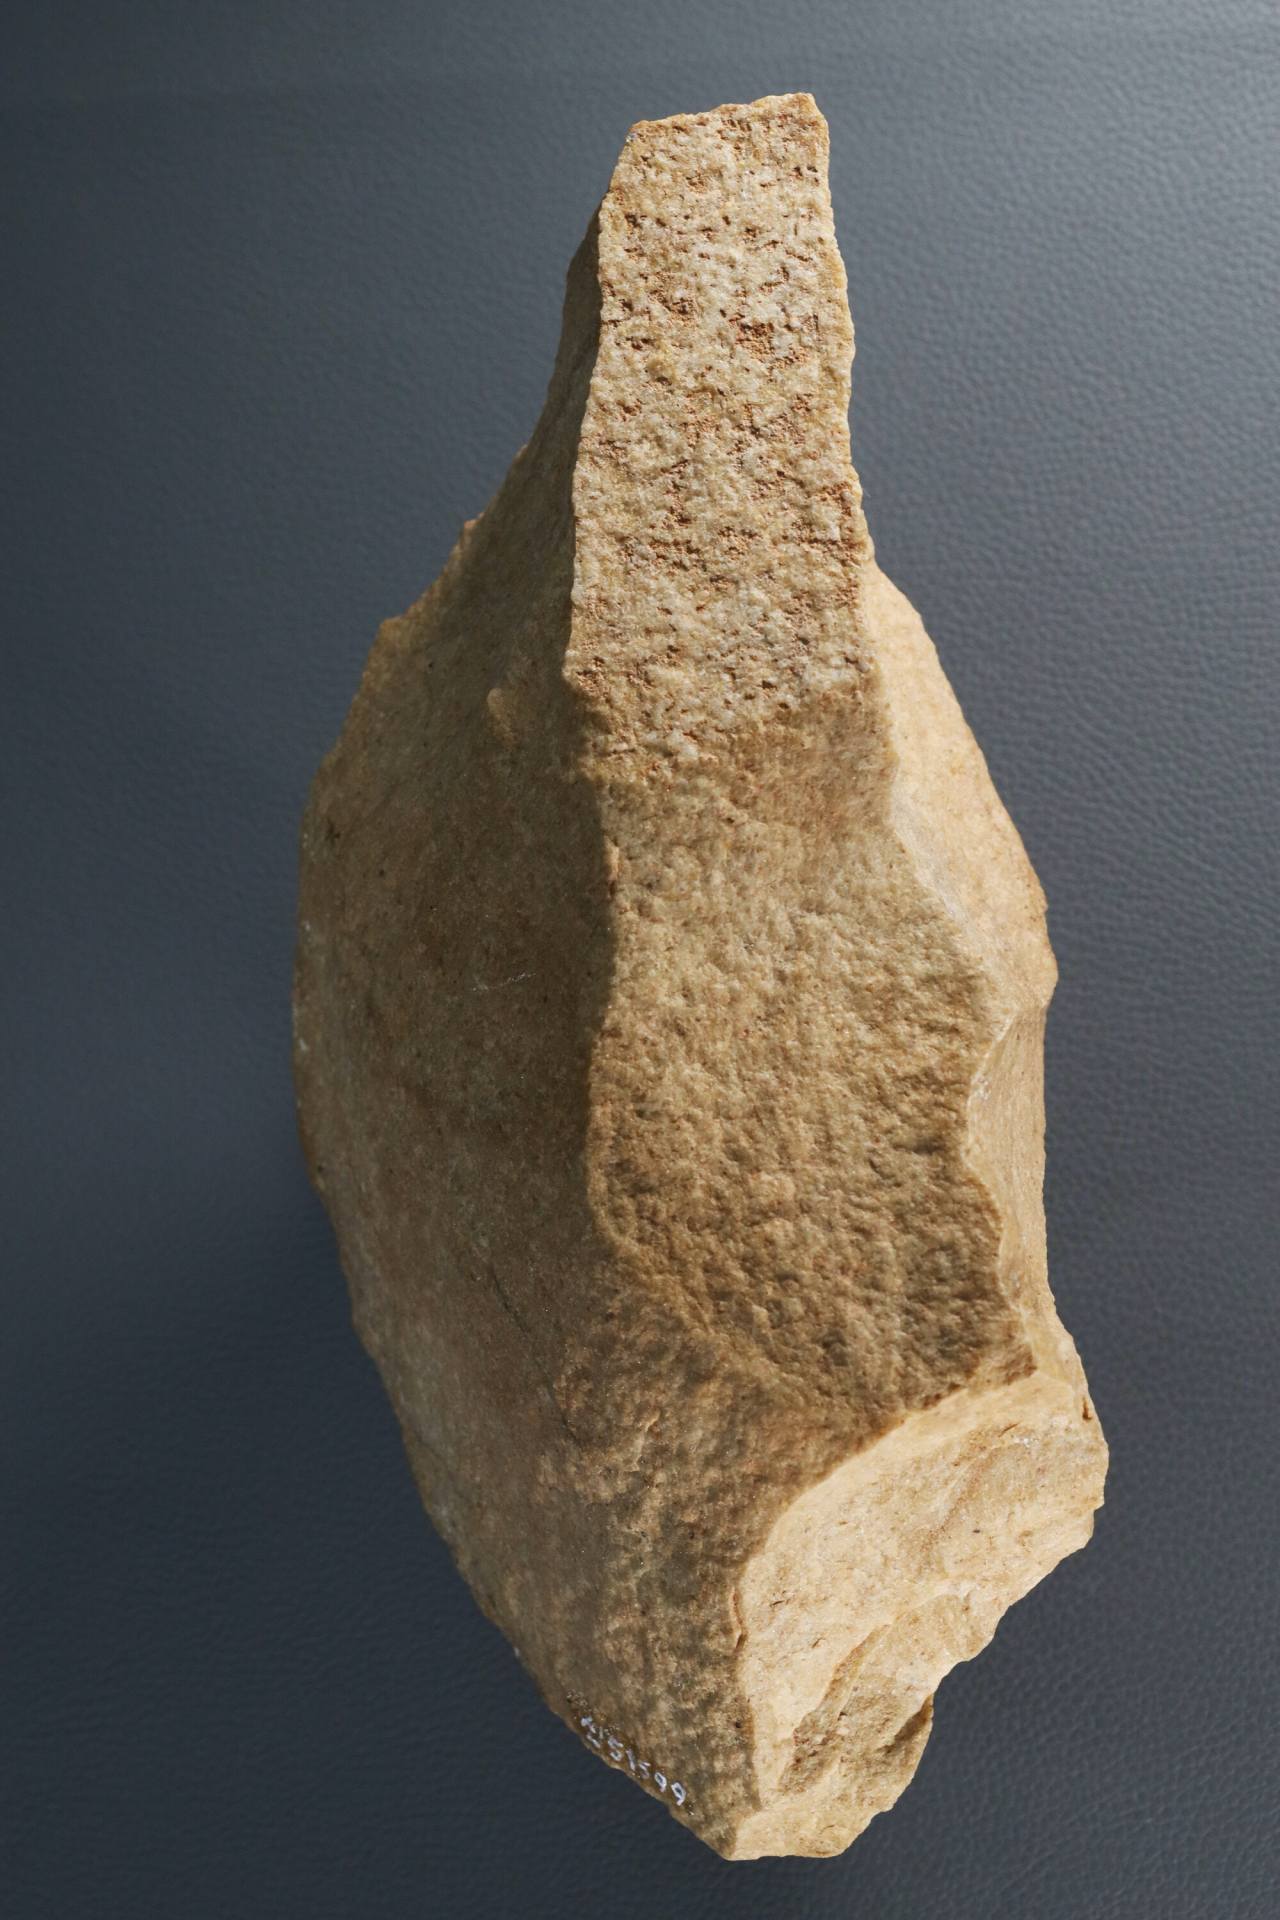 Discovered in 1978 near Hantan River in Jeongok-eup, Yeoncheon-gun, Gyeonggi Province, by US Airman Greg Bowen, Jeongok-ri handaxe is pictured with special permission at the National Museum of Korea in Seoul.Photo © HyungwonKang